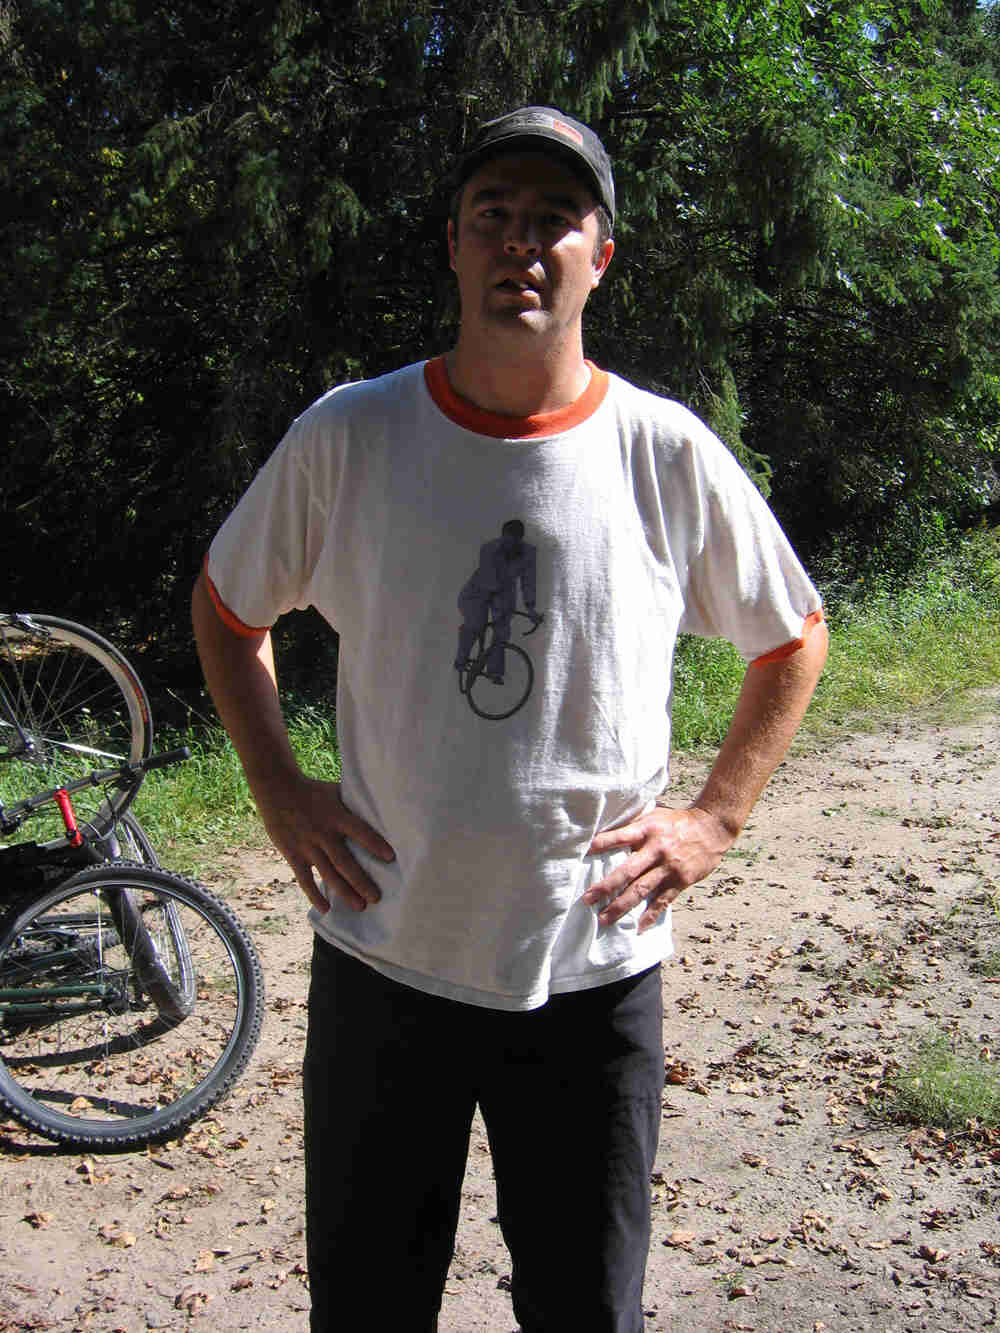 Front view of a person wearing a white t-shirt with a bicyclist on it, with trees in the background